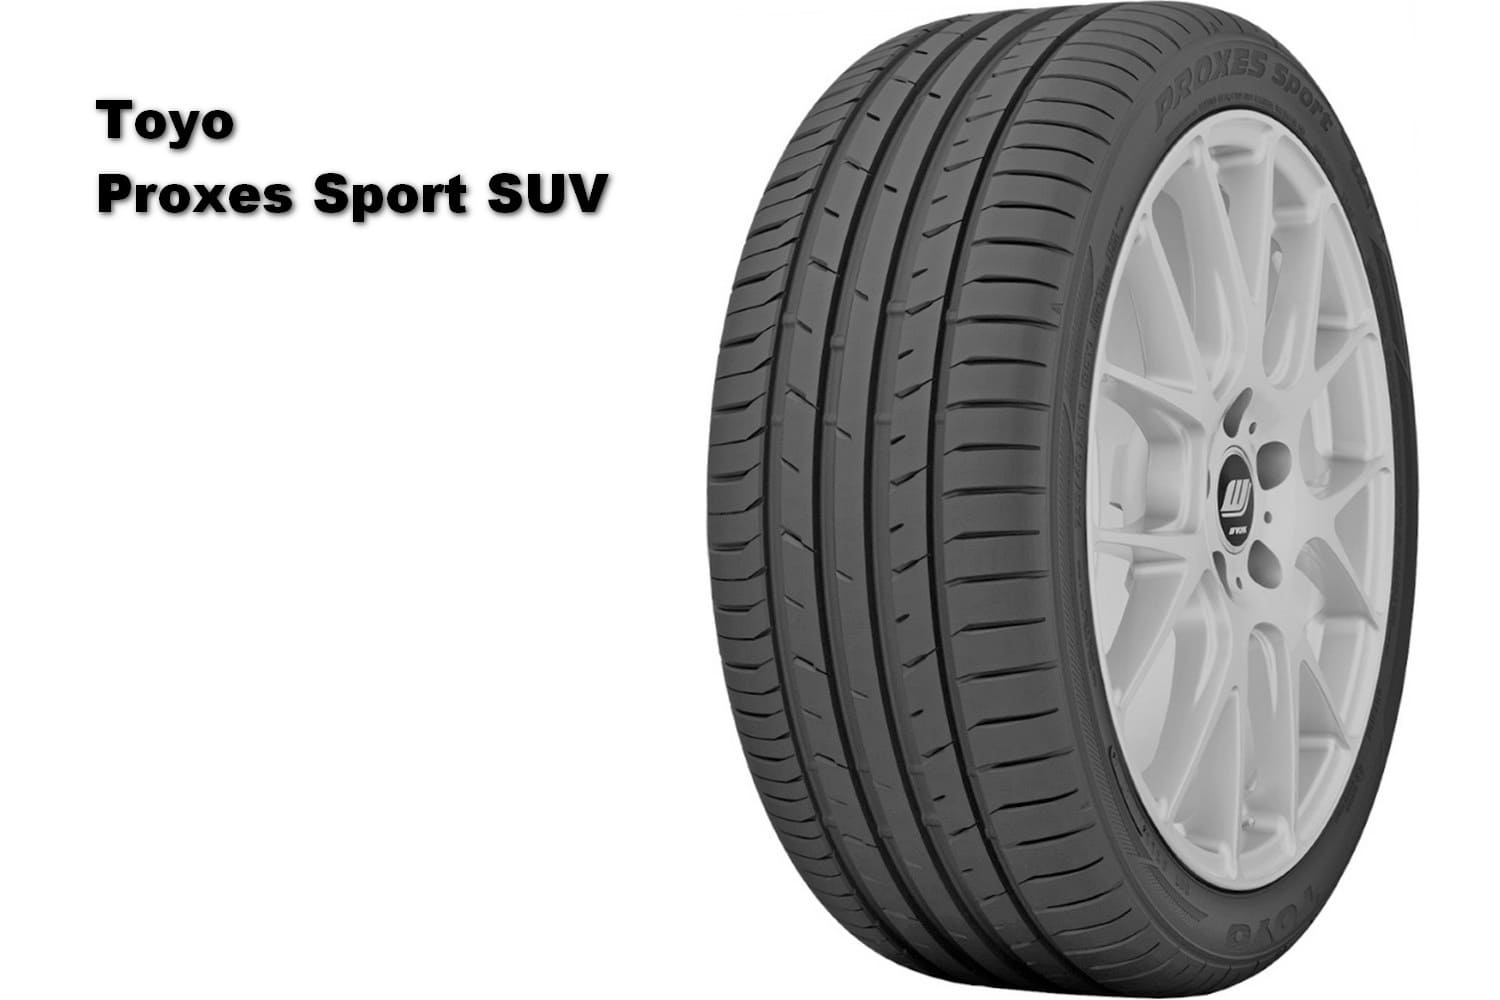 Toyo proxes sport r18. Toyo PROXES t1 Sport SUV 255/50 r19. Toyo PROXES t1 Sport. Toyo PROXES Sport SUV. Toyo PROXES Sport 255/40 r19.